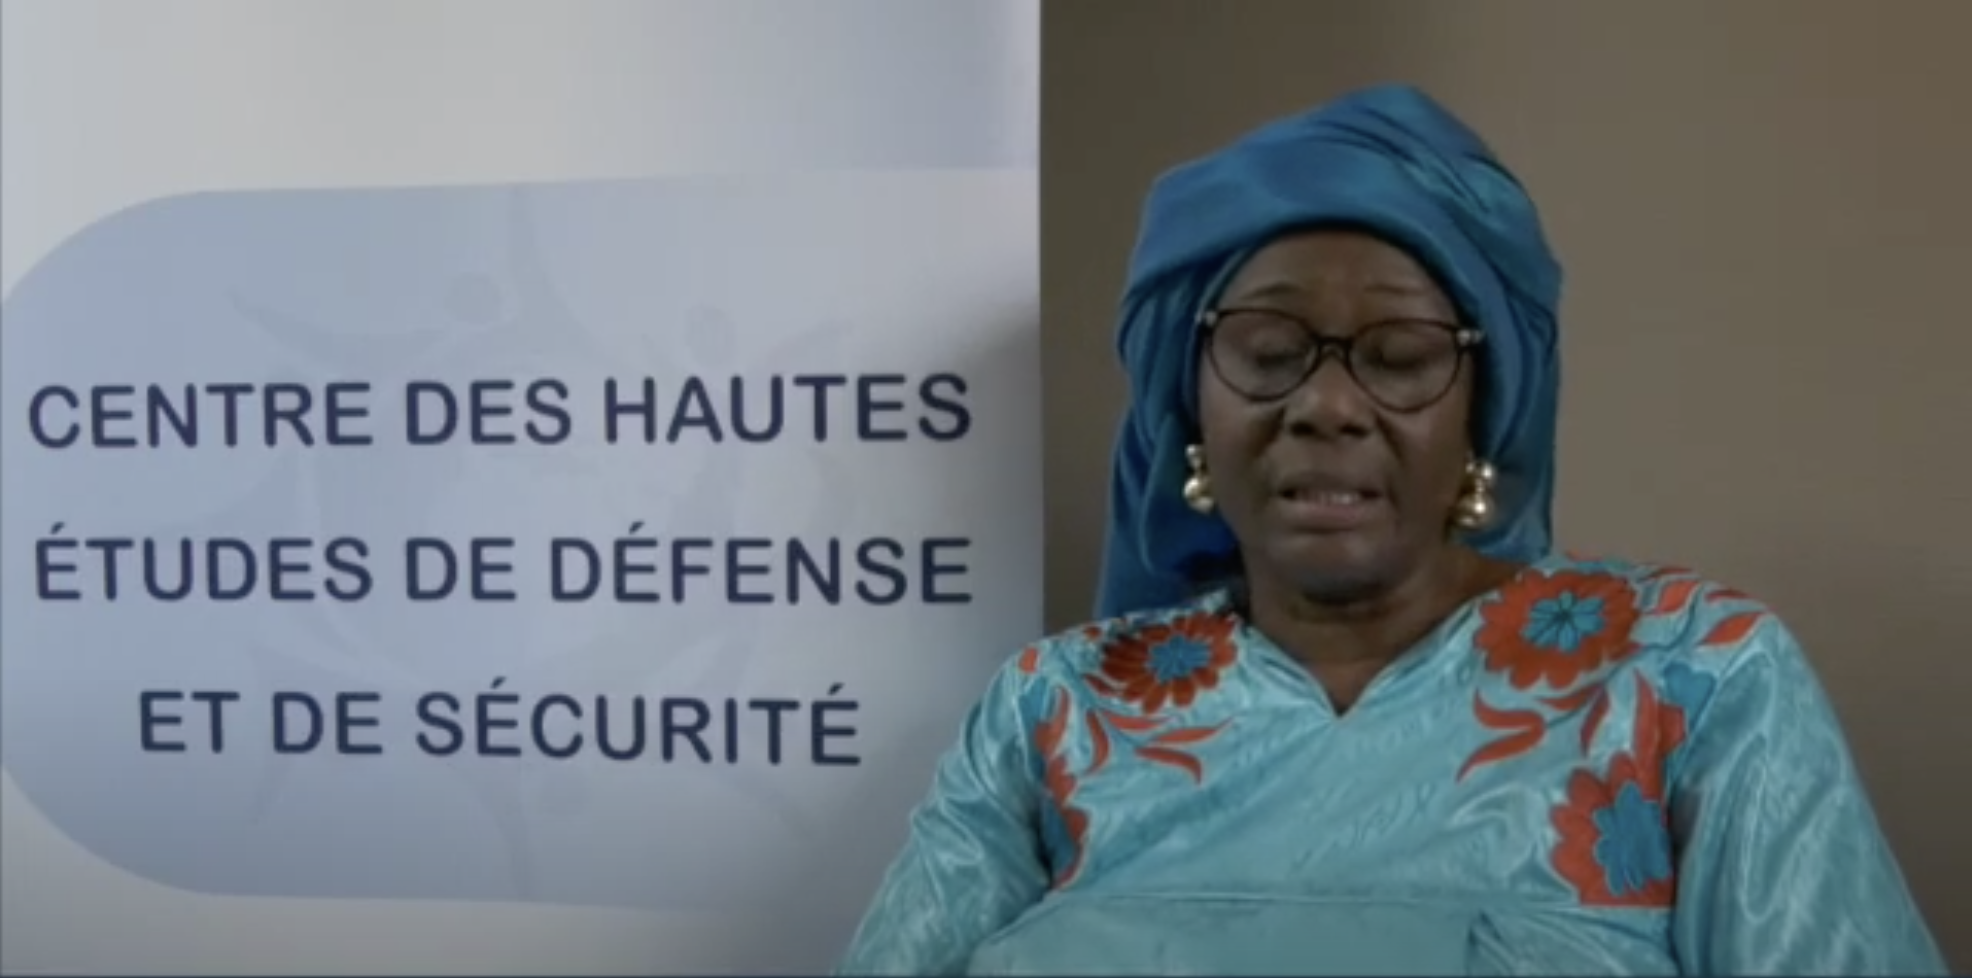 INTERVIEW avec Mme Coumba NGOUILLE THIAM